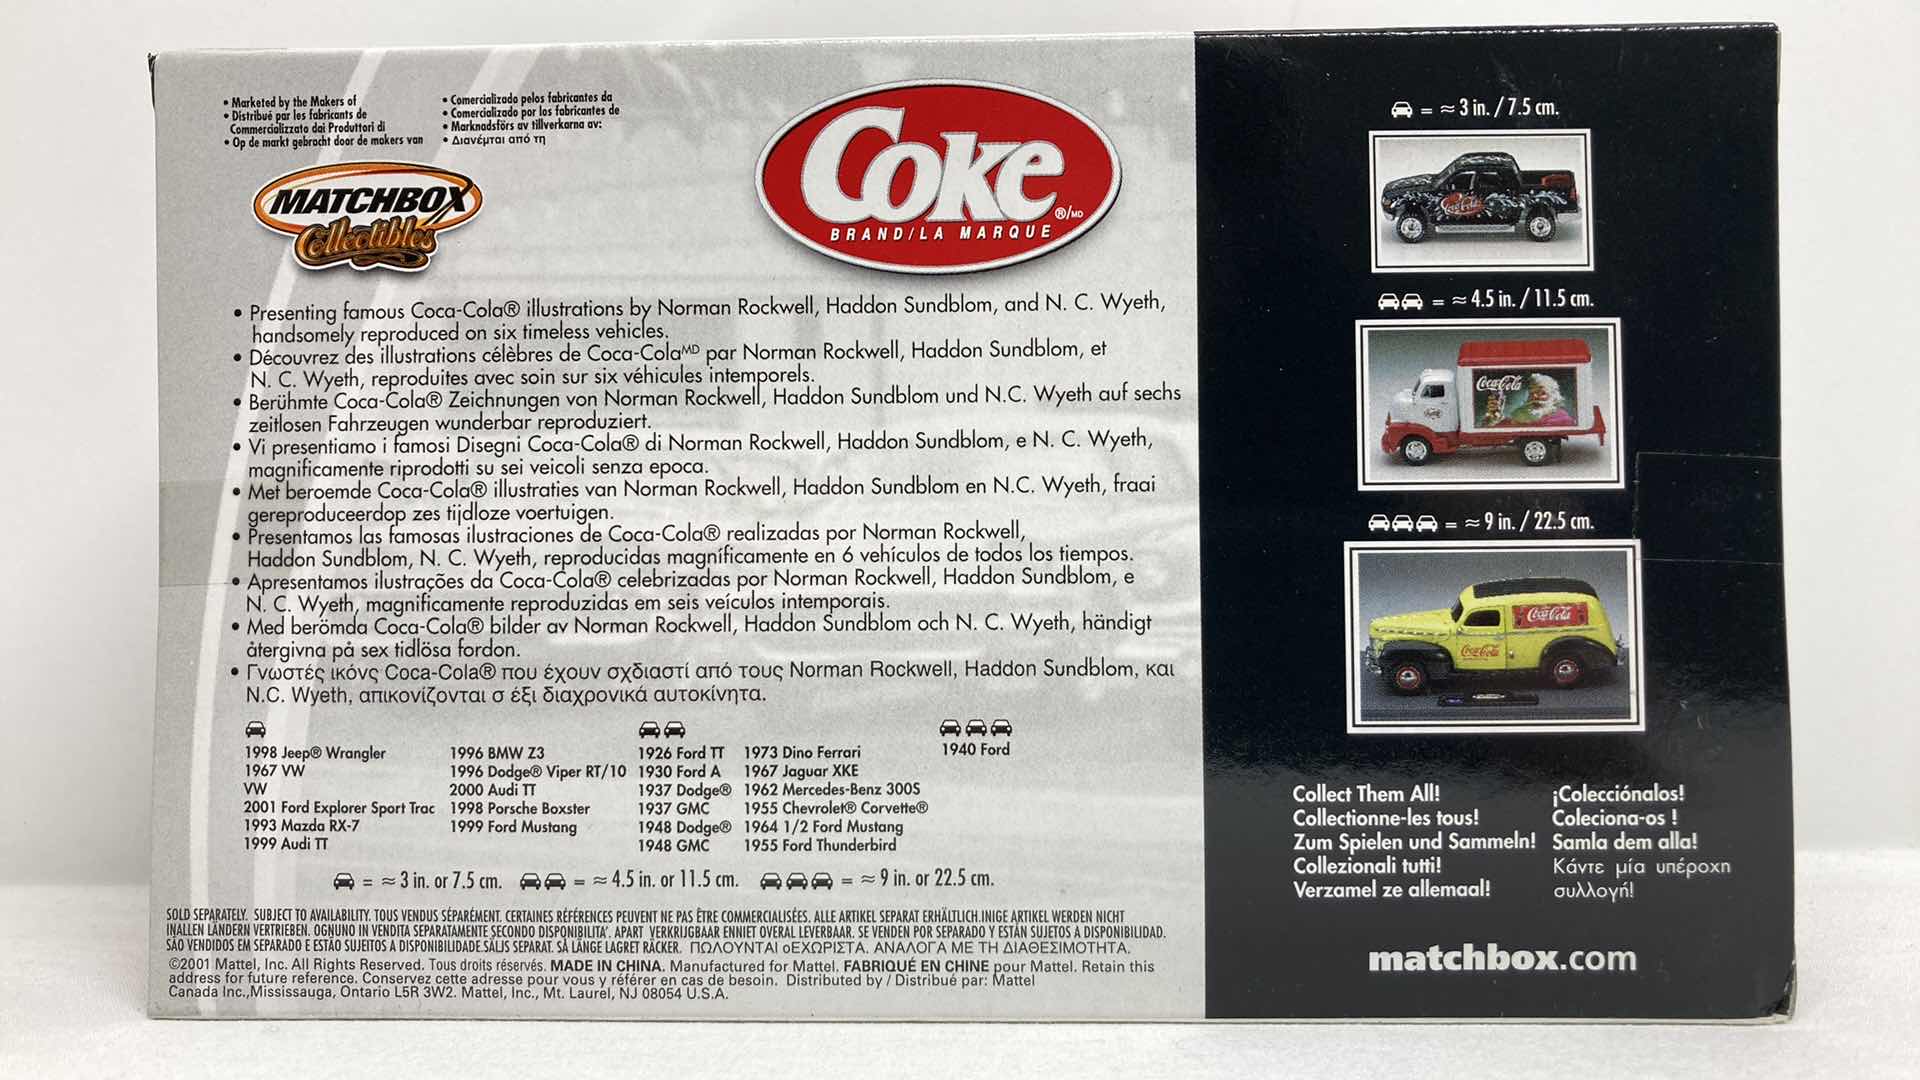 Photo 3 of MATCHBOX COLLECTIBLES COCA-COLA 1926 FORD TT NORMAN ROCKWELL TRUCK